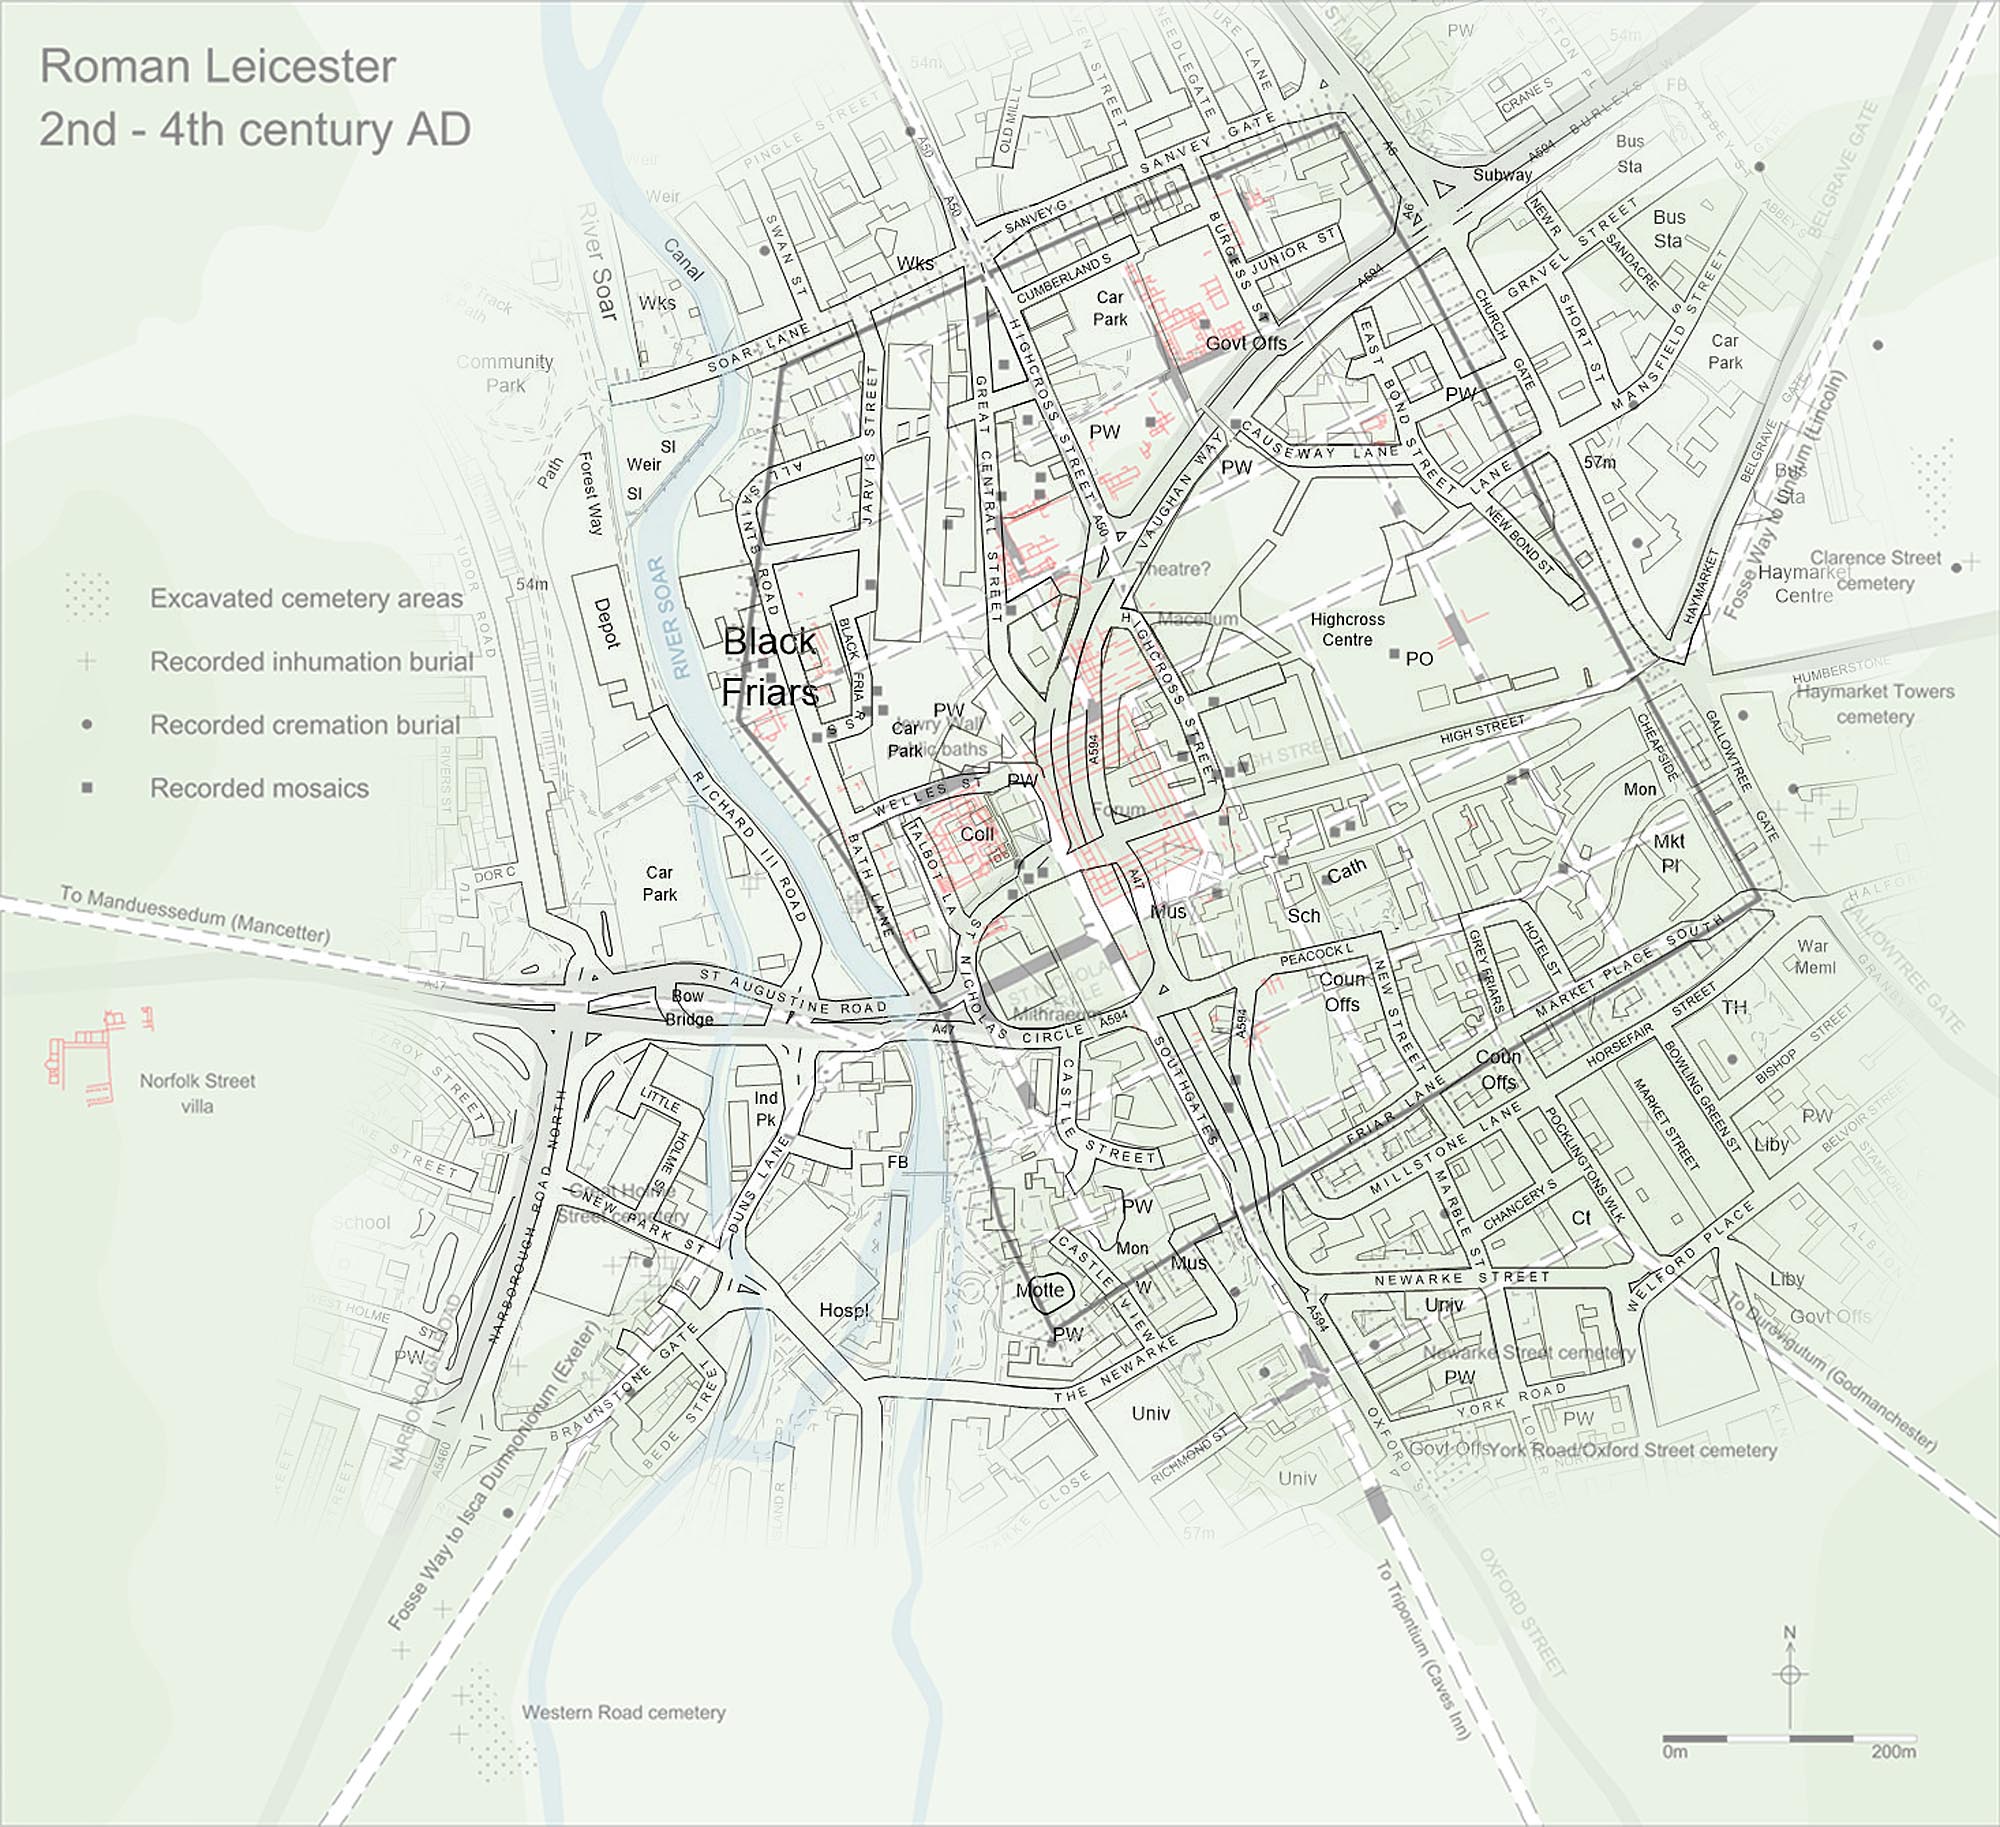 Plan of Roman Leicester with modern road overlay - University of Leicester Archaeological Services